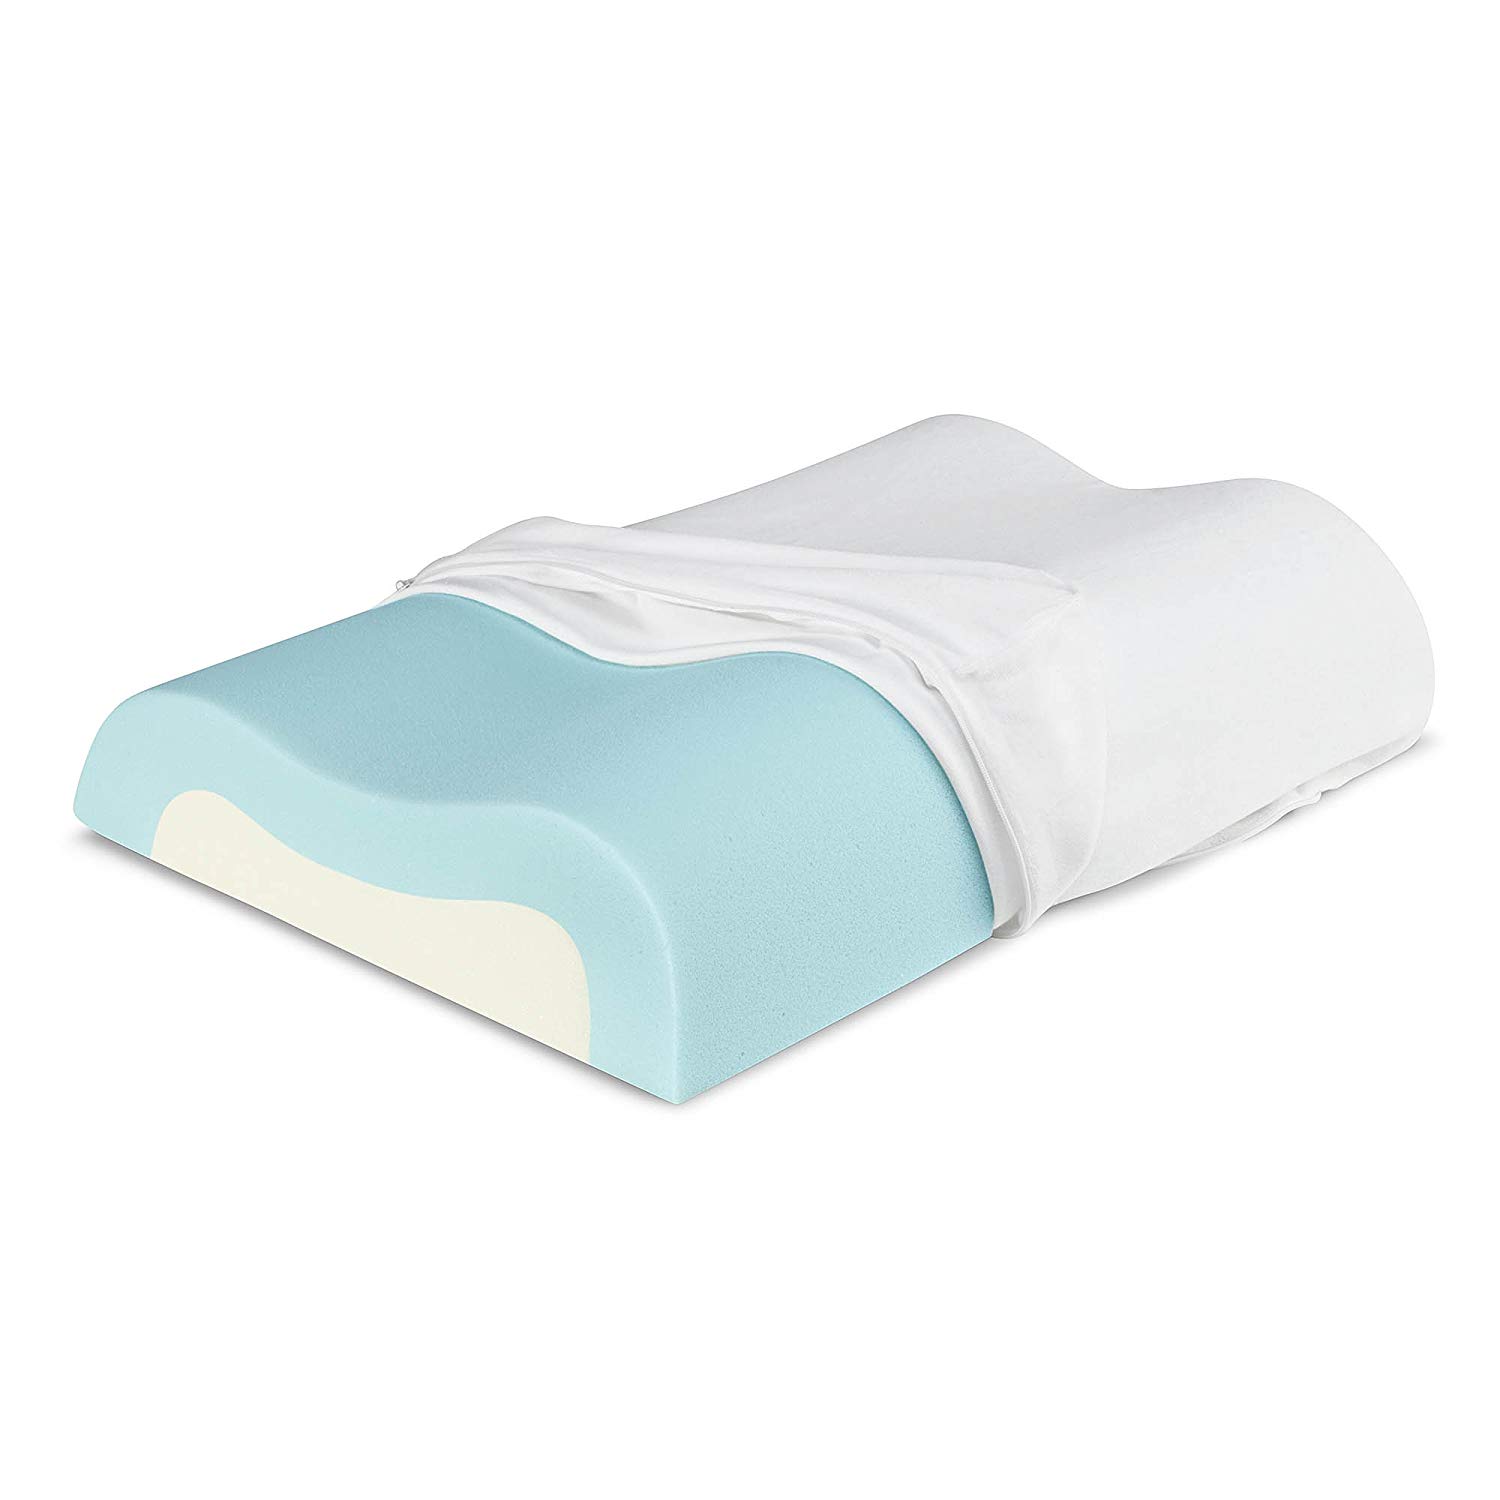 Normally $39, this memory foam pillow is 31 percent off today (Photo via Amazon)